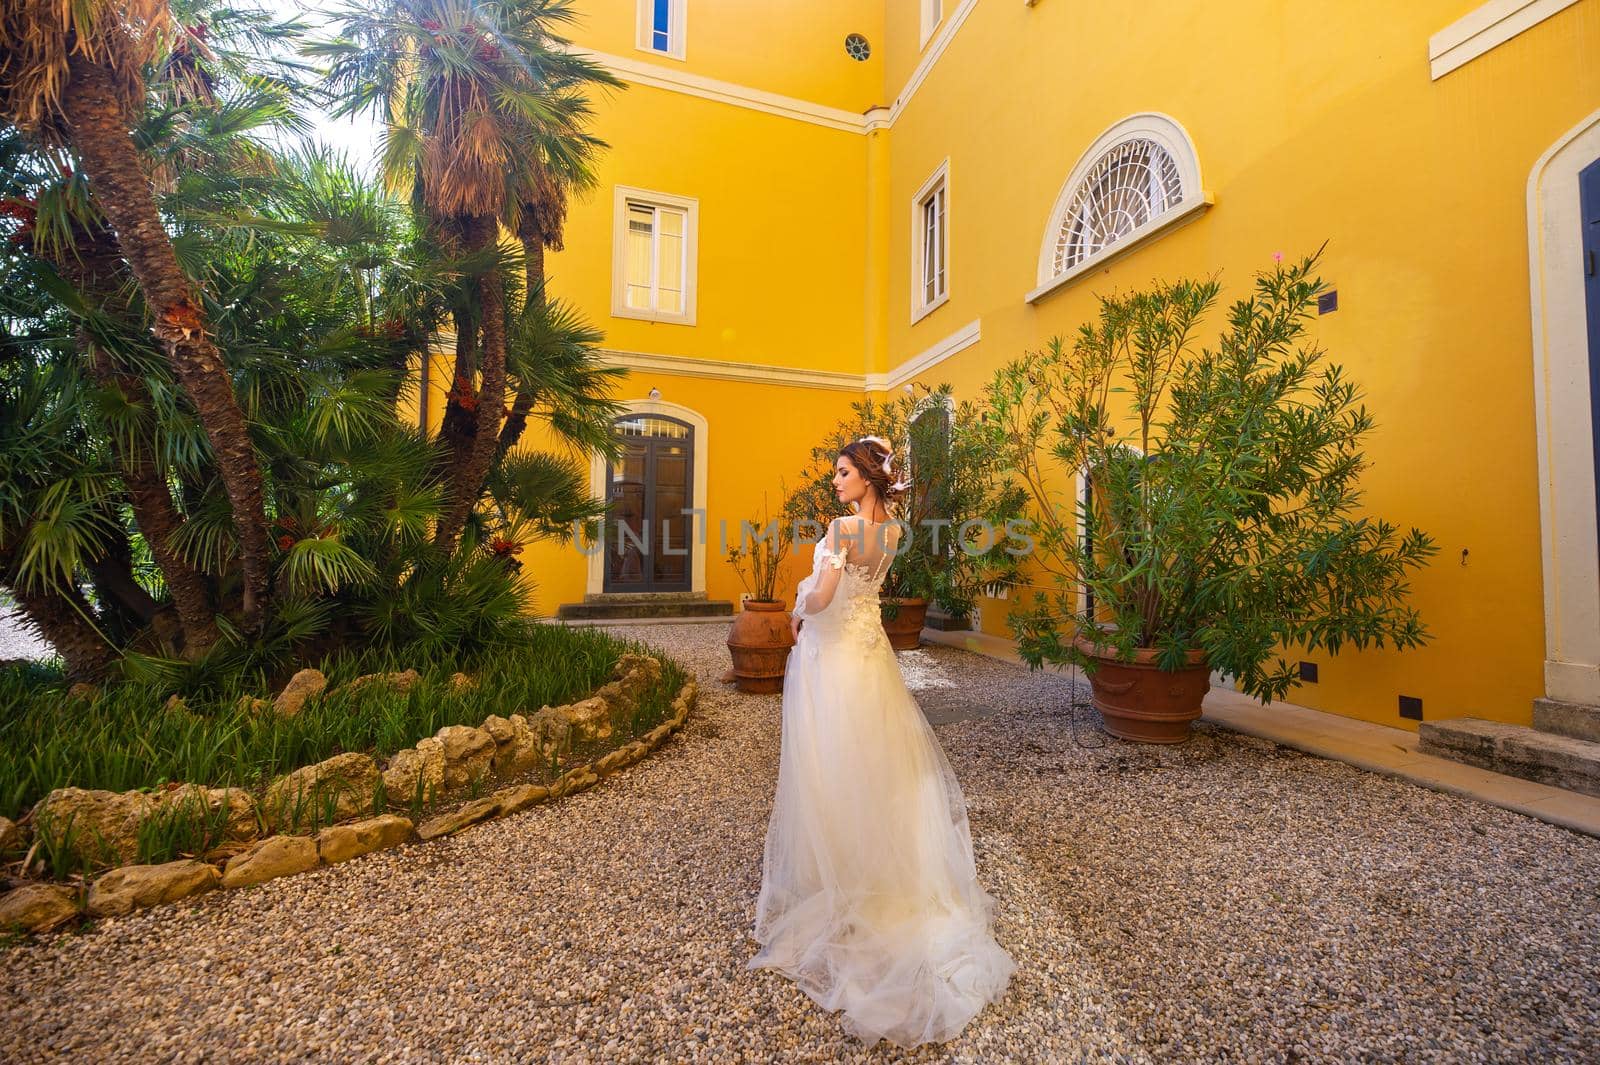 Stylish young bride on her wedding day in Italy.elegant Bride from Tuscany.Bride in a white wedding dress by Lobachad